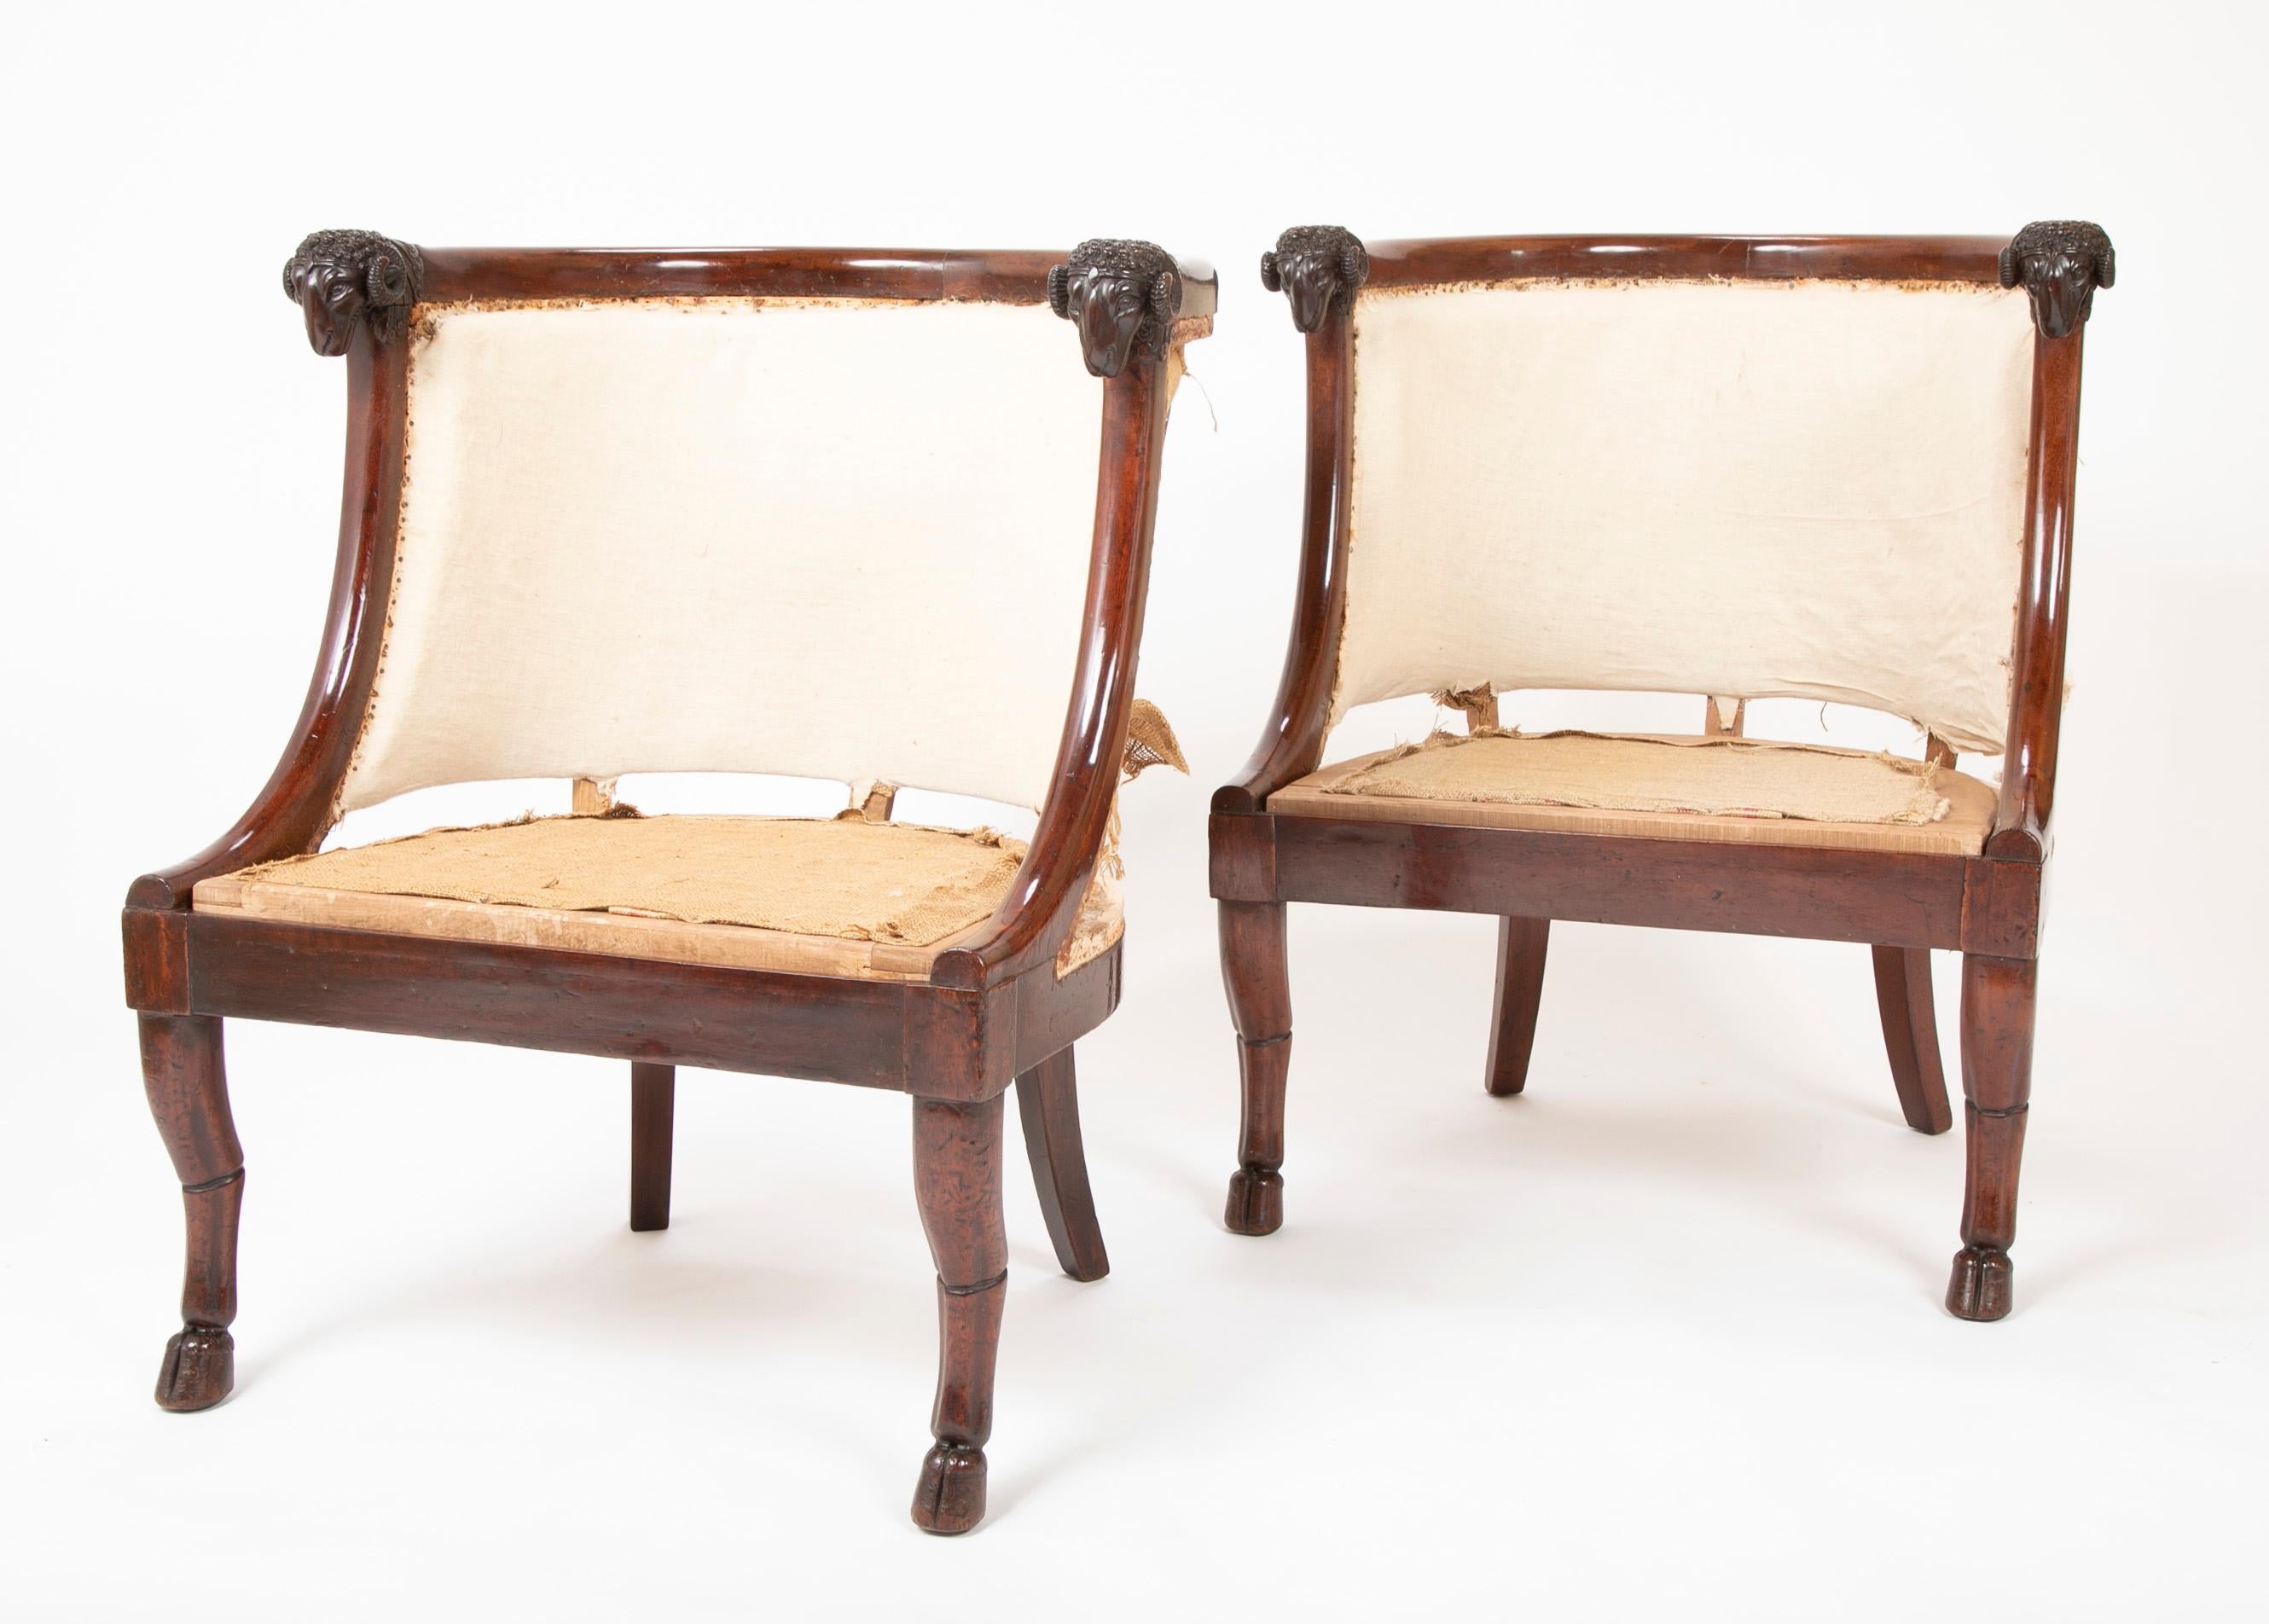 A very fine pair of French Empire mahogany armchairs attributed to Jacob Desmalter, circa 1805. The shaped backs ending in beautifully carved rams head terminals, the elegant legs with hoof feet. Wonderful design, the epitome of the French First